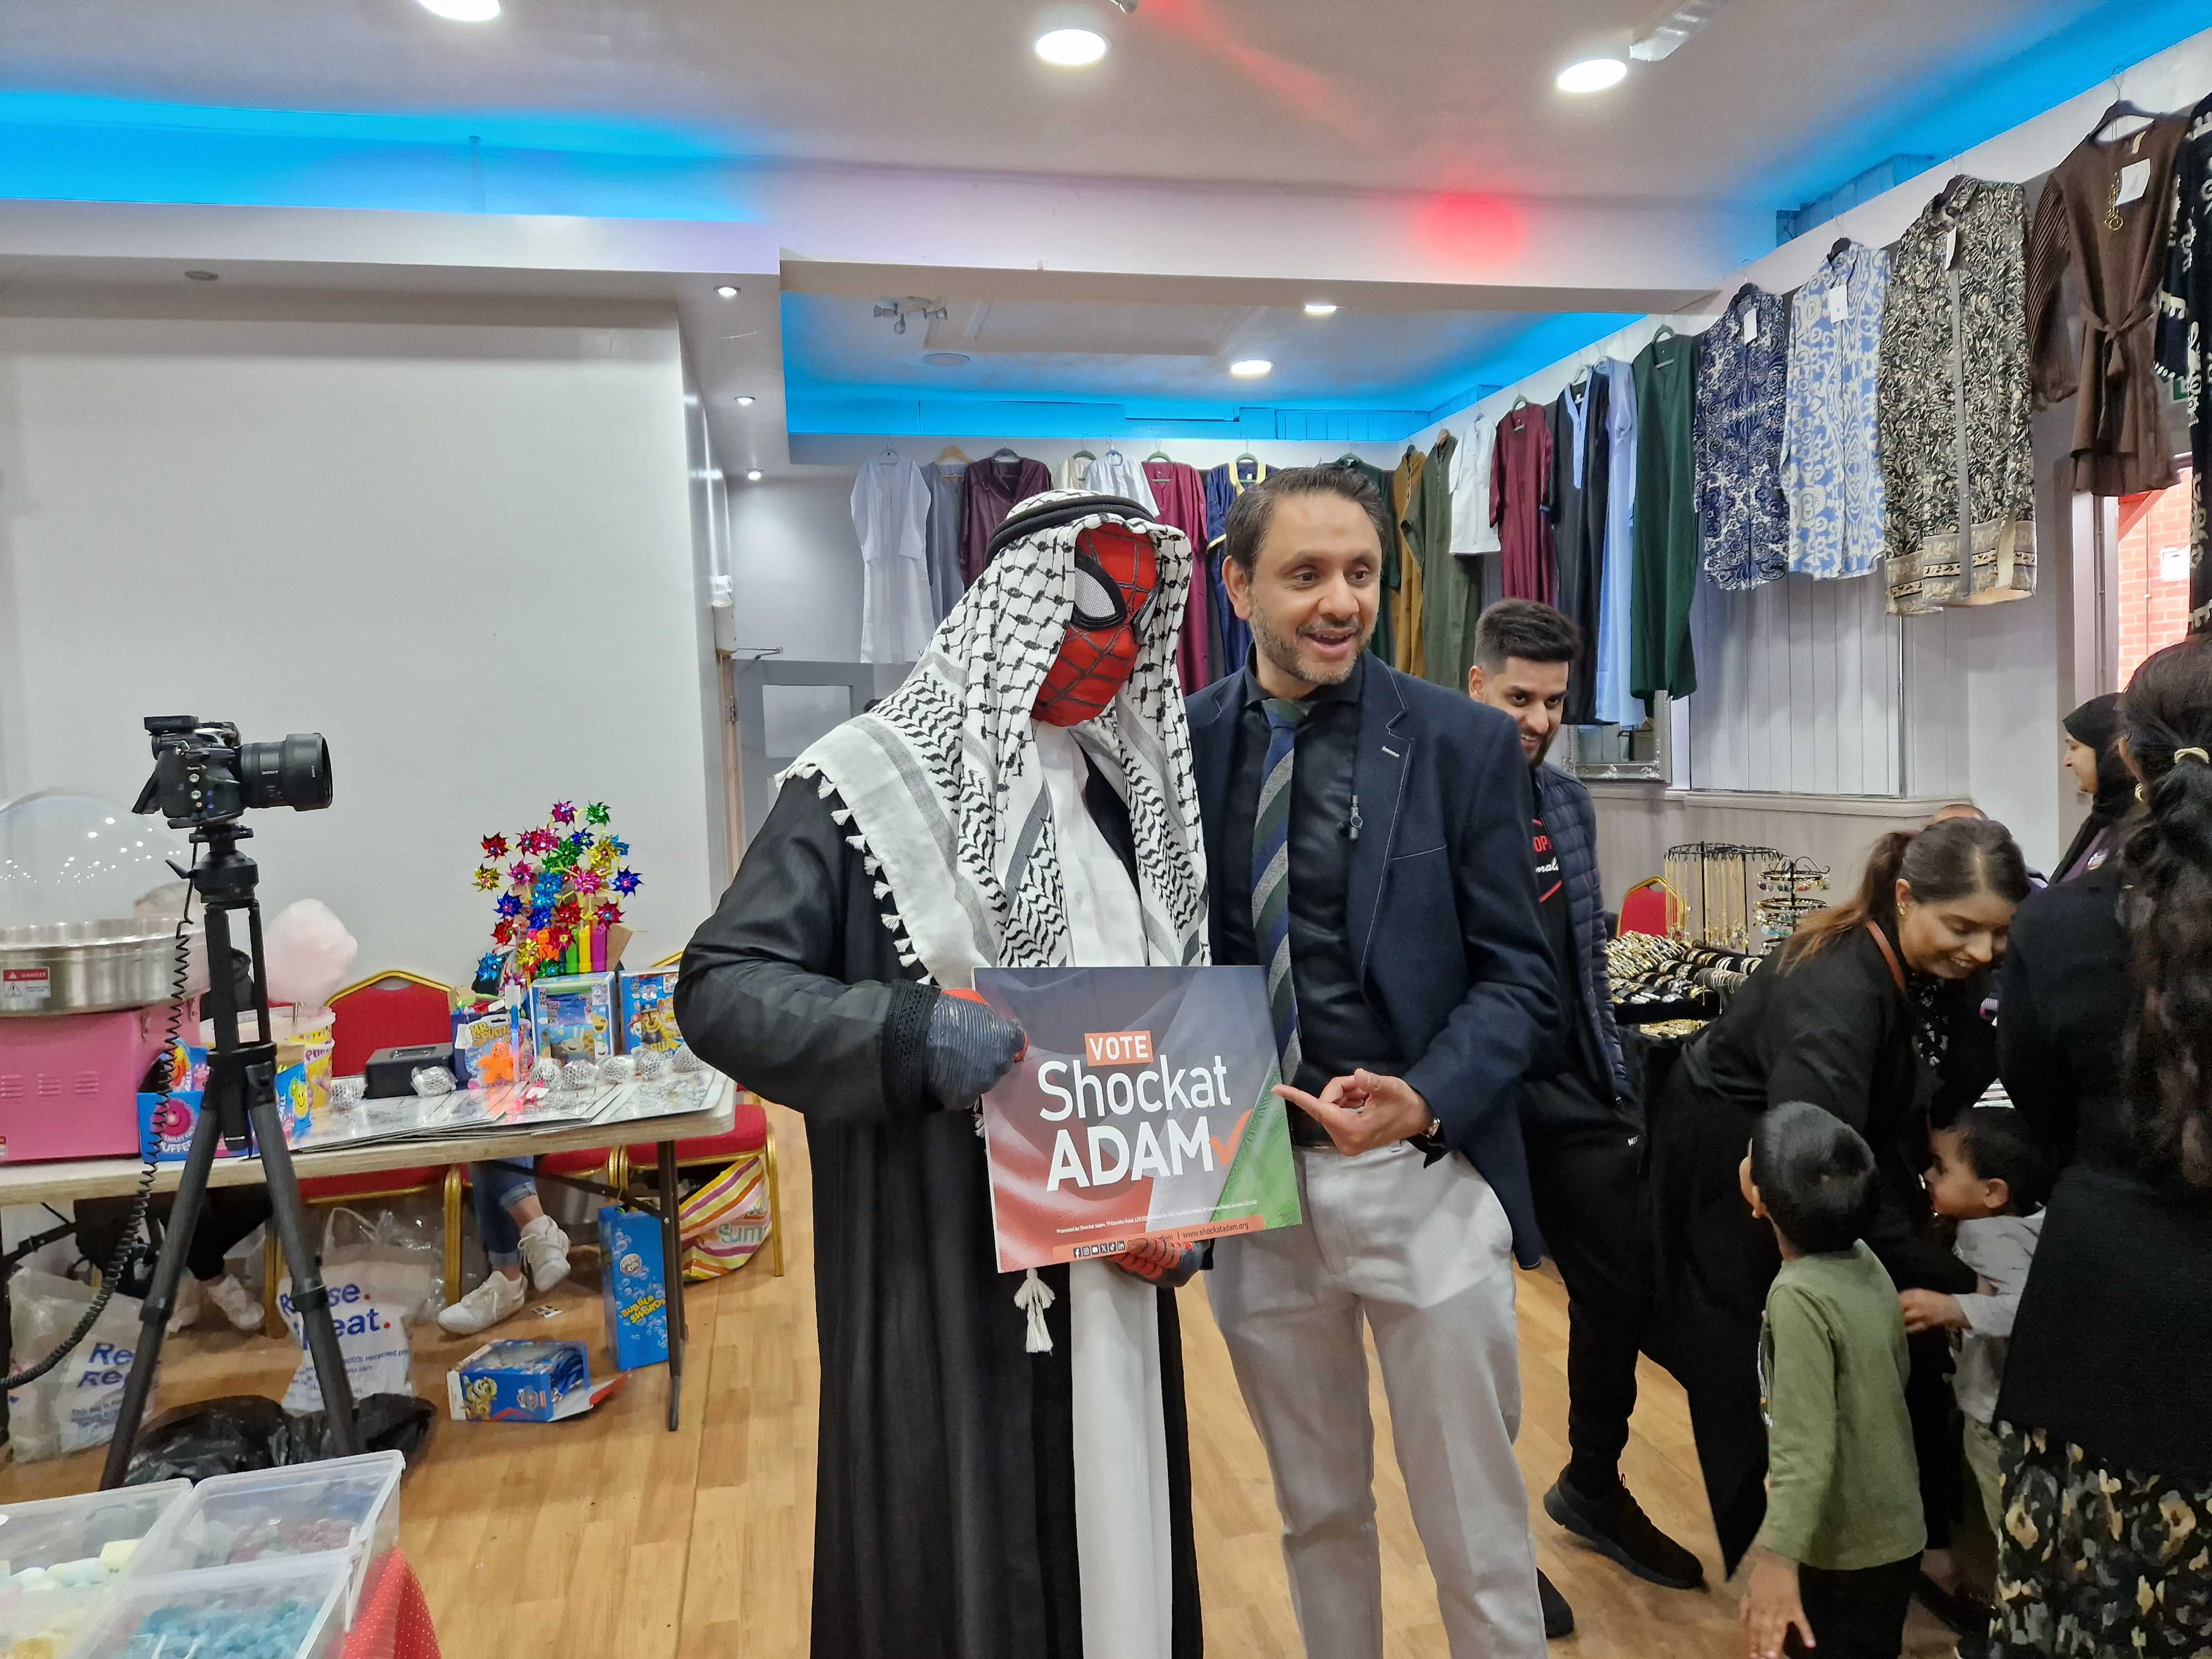 A man dressed as "Arab Spiderman" poses next to Shockat Adam at a charity event